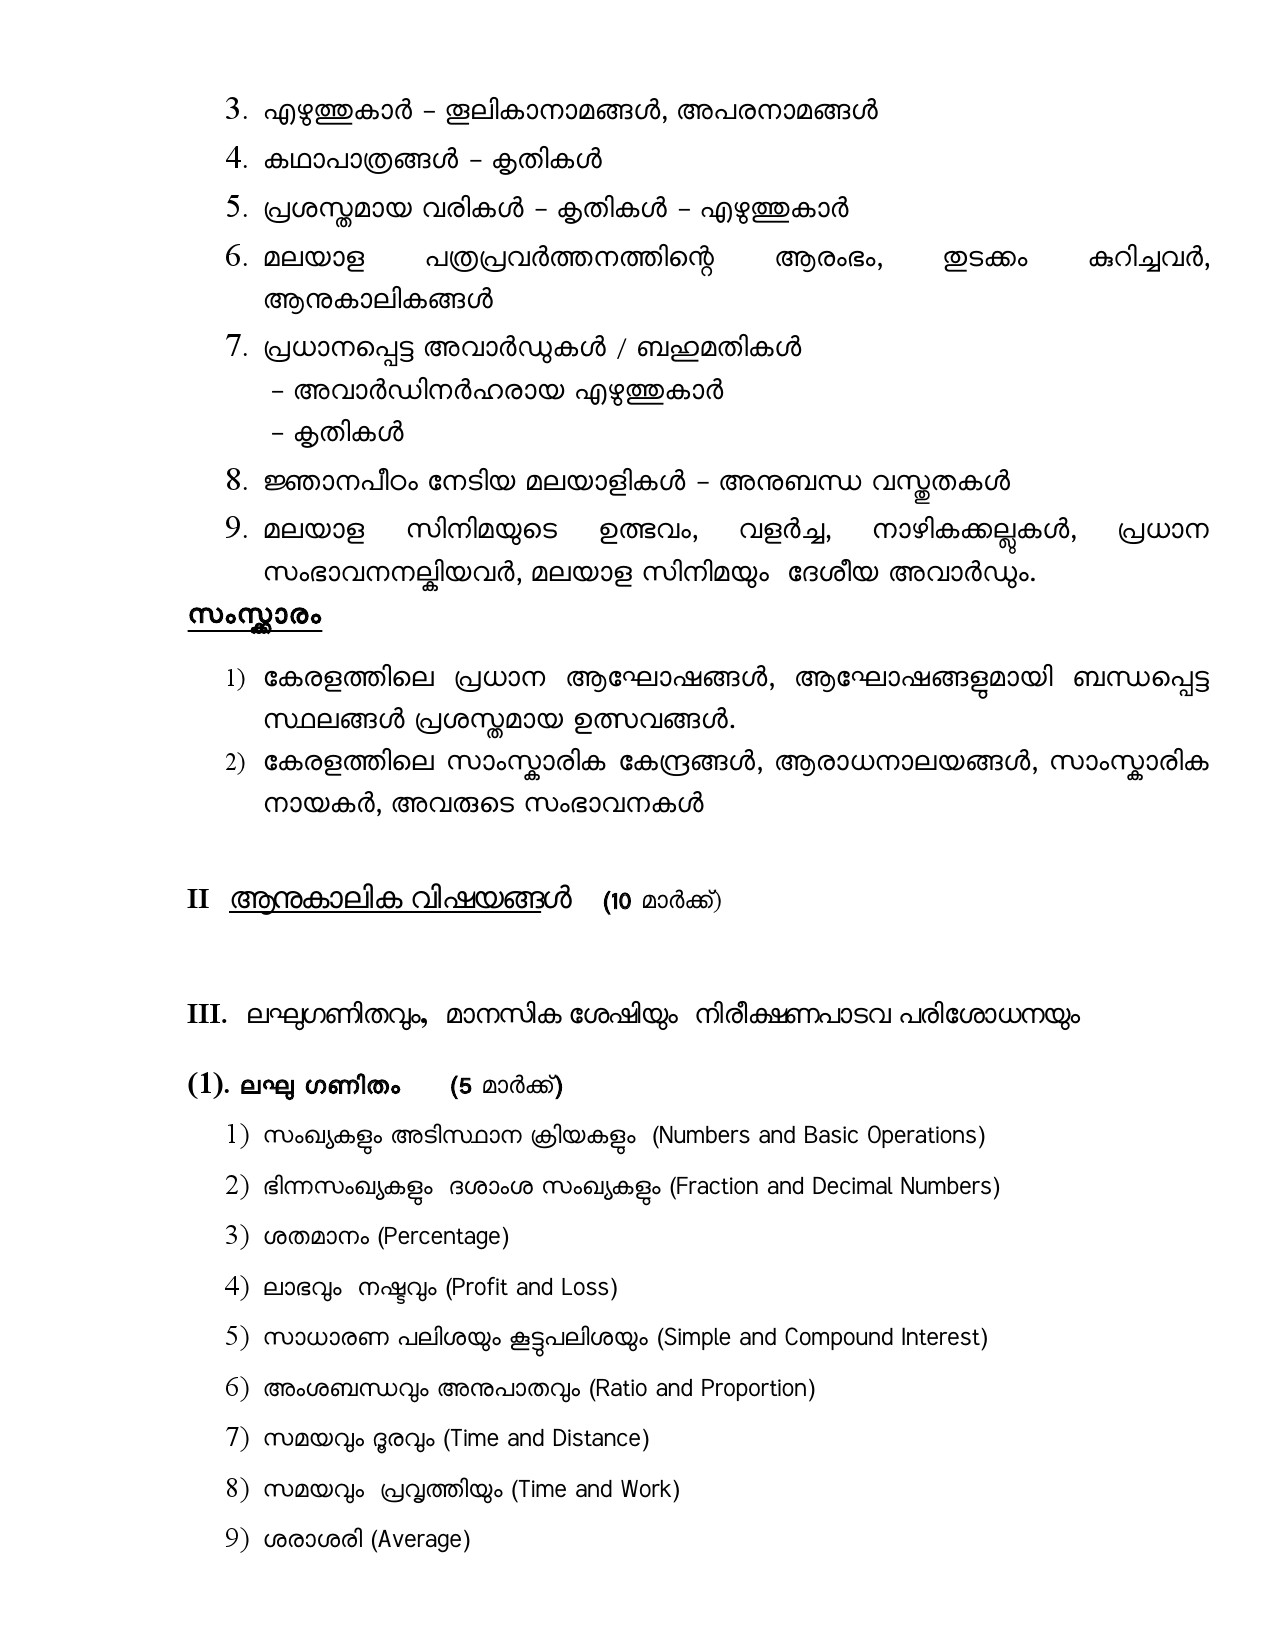 Civil Excise Officer Final Examination Syllabus For Plus Two Level - Notification Image 7